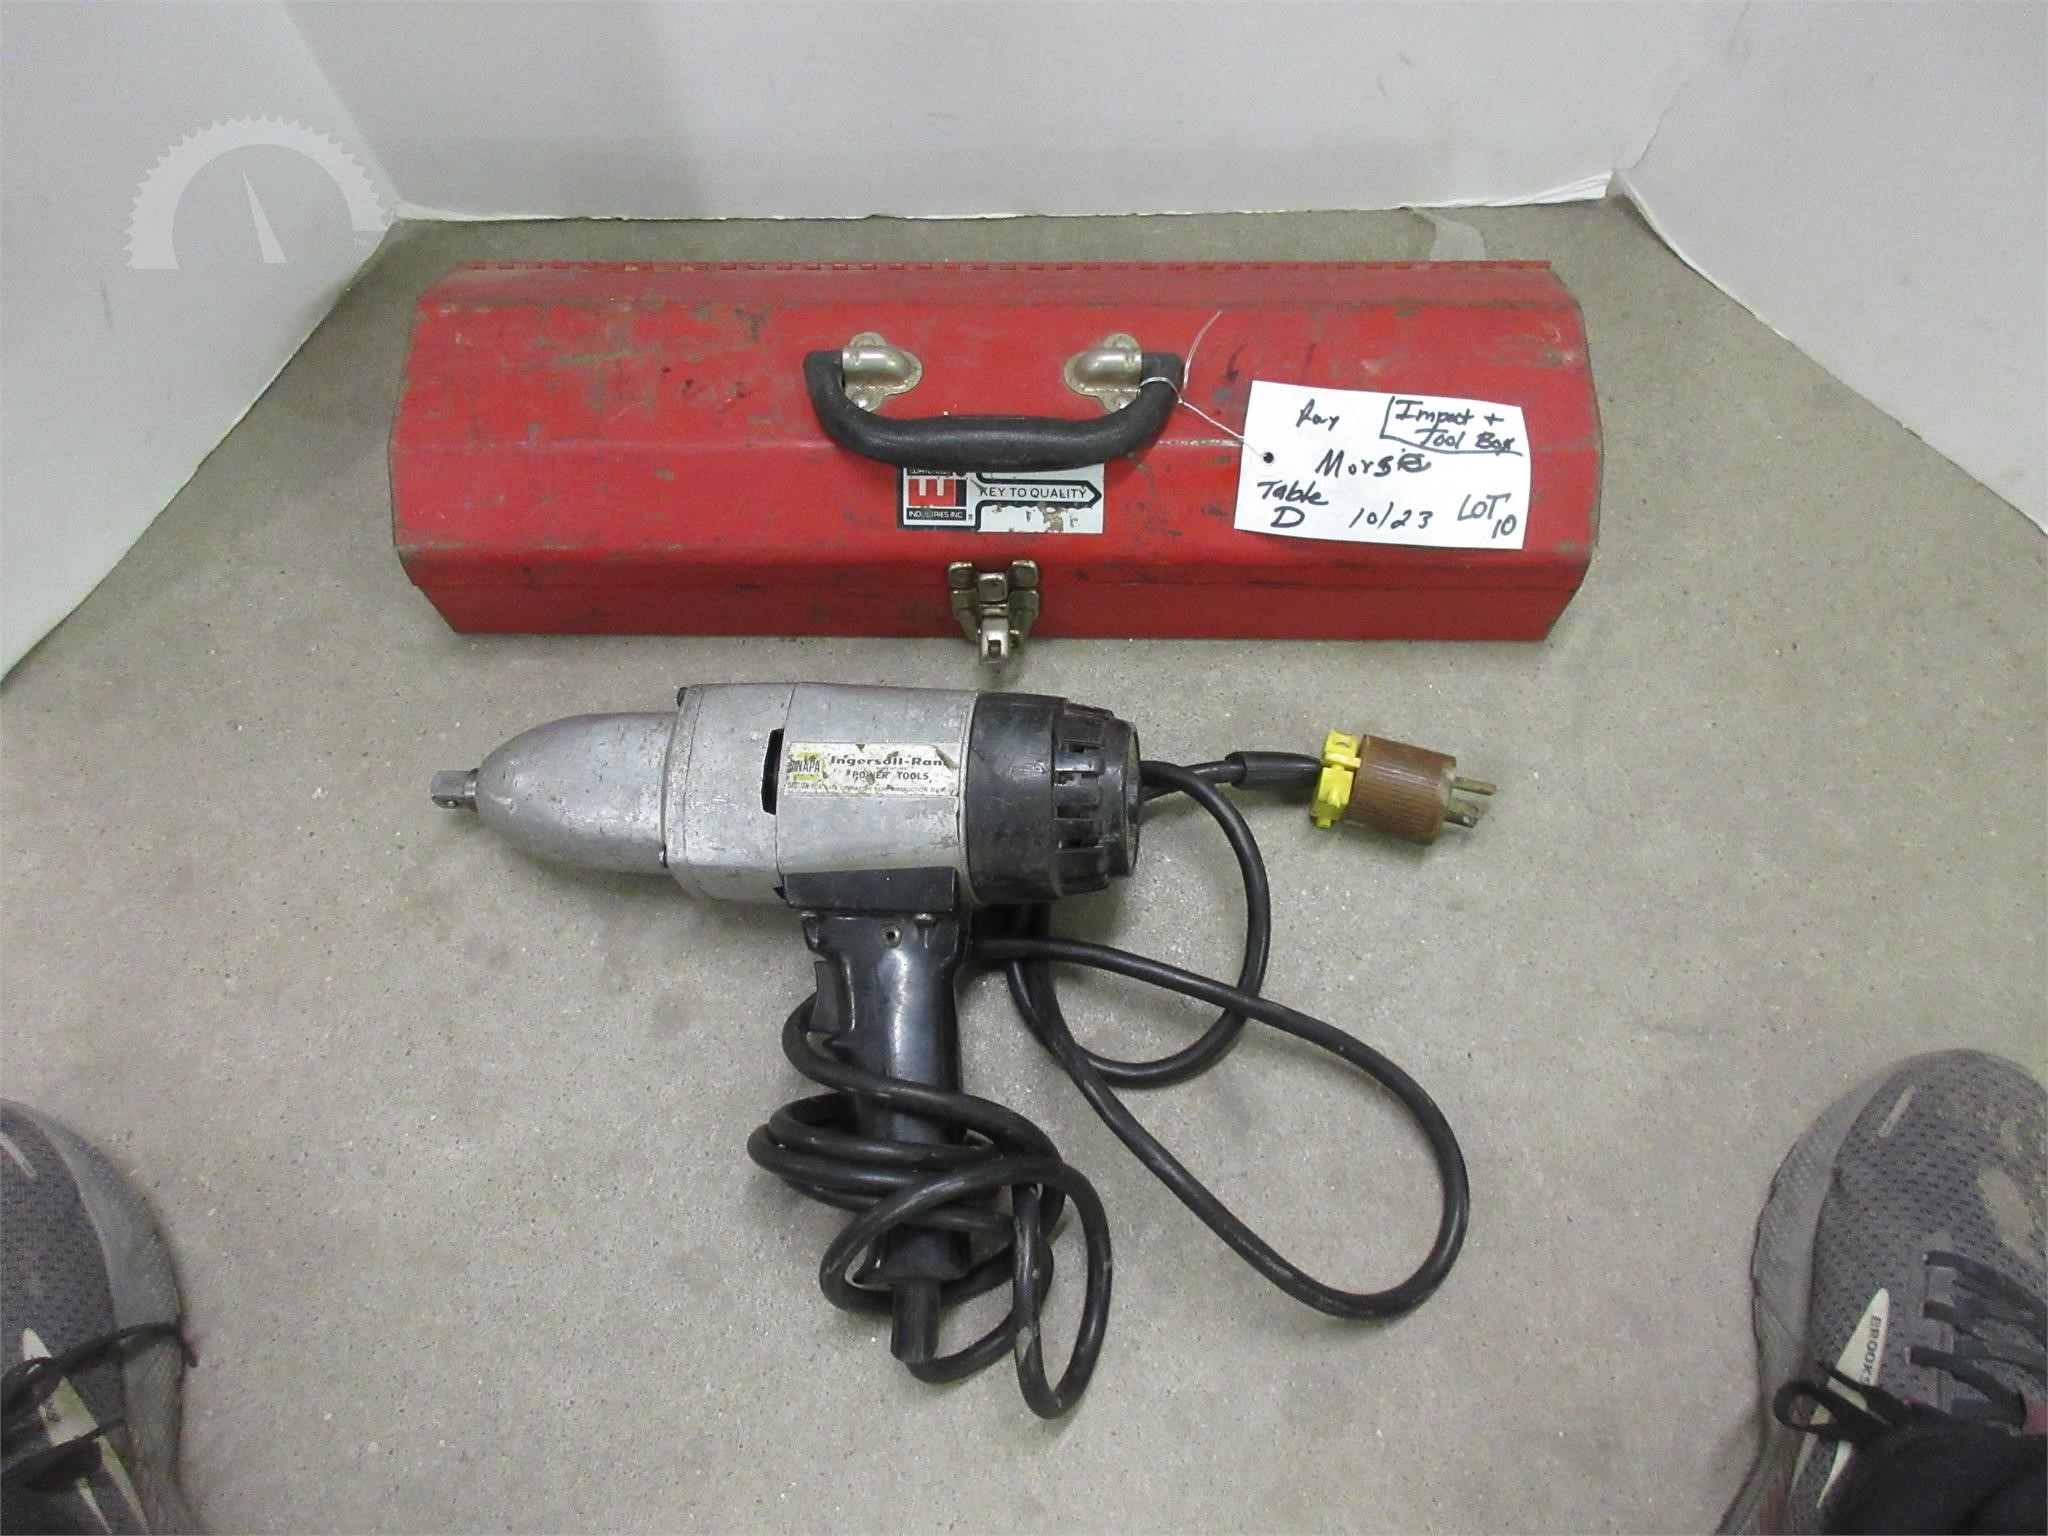 Black and Decker Electric Staple Gun Model 9700, St. Paul - West 7th Area  - Vacuum Tubes, Electronics Parts, Tools, Electrical Supplies, Drill Bits,  Hardware, Storage Cabinets, Vintage Shoe Repair and More